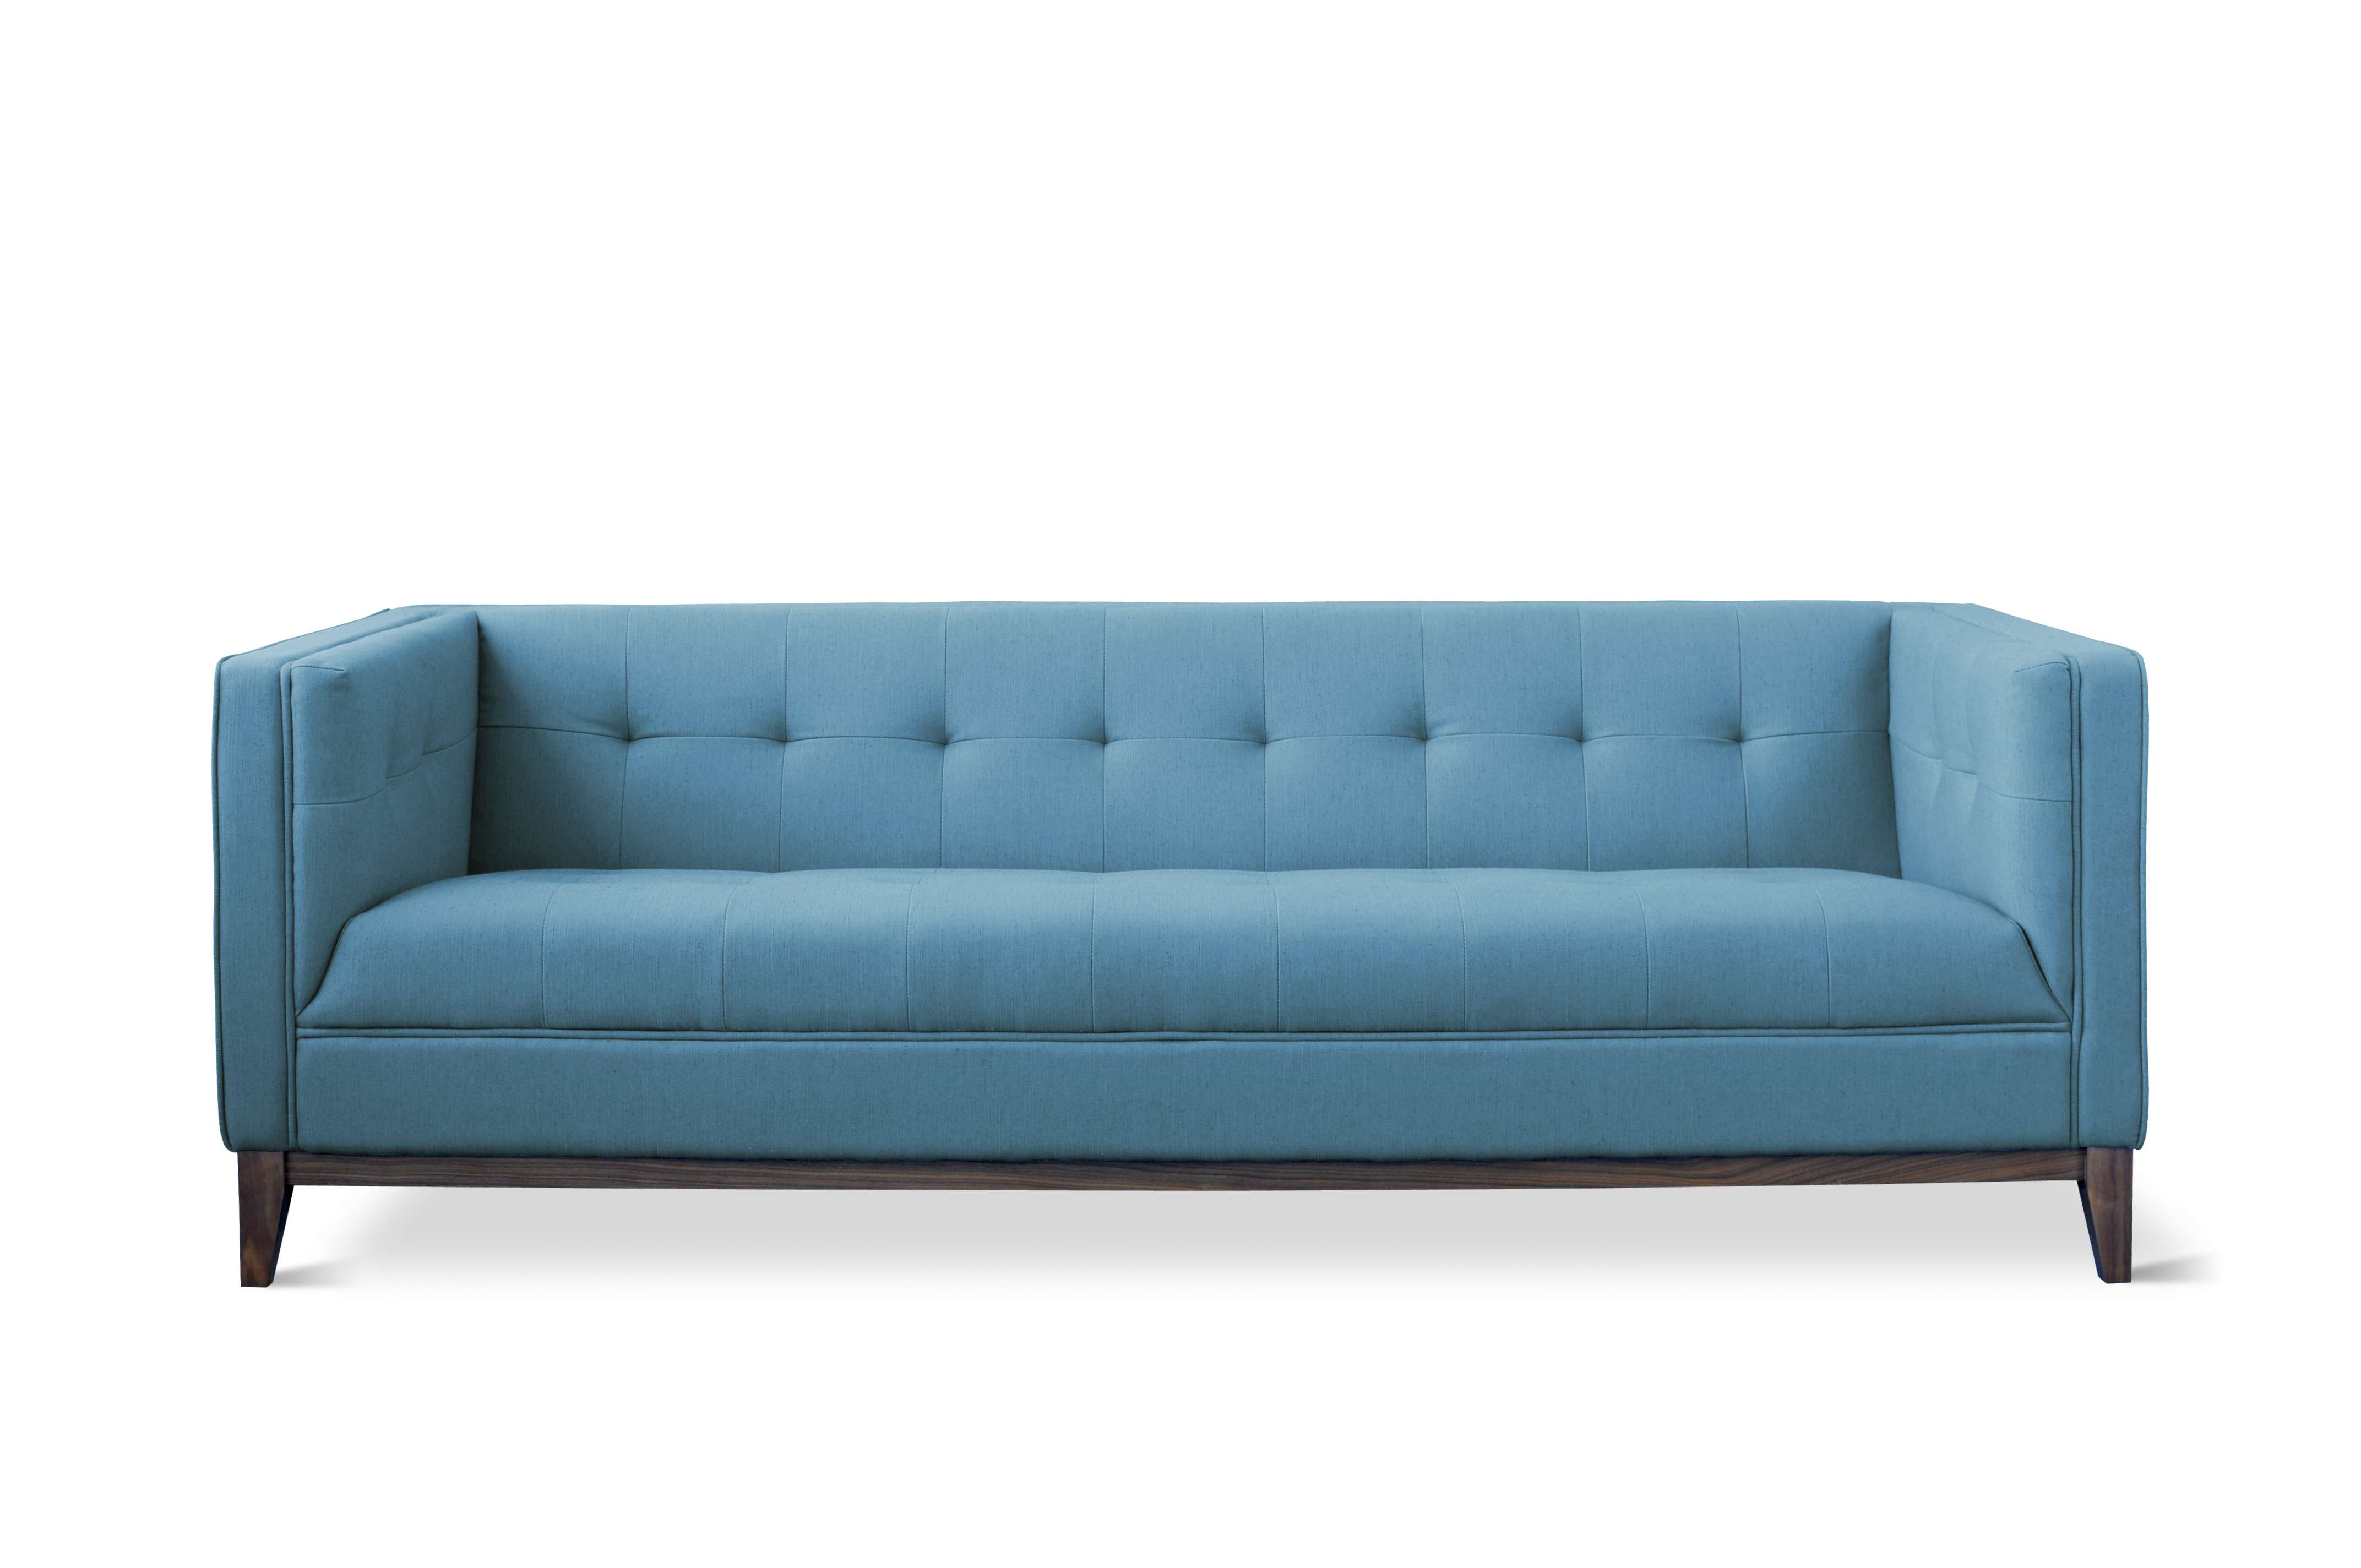 The Atwood sofa has a frame of sustainably sourced sycamore.